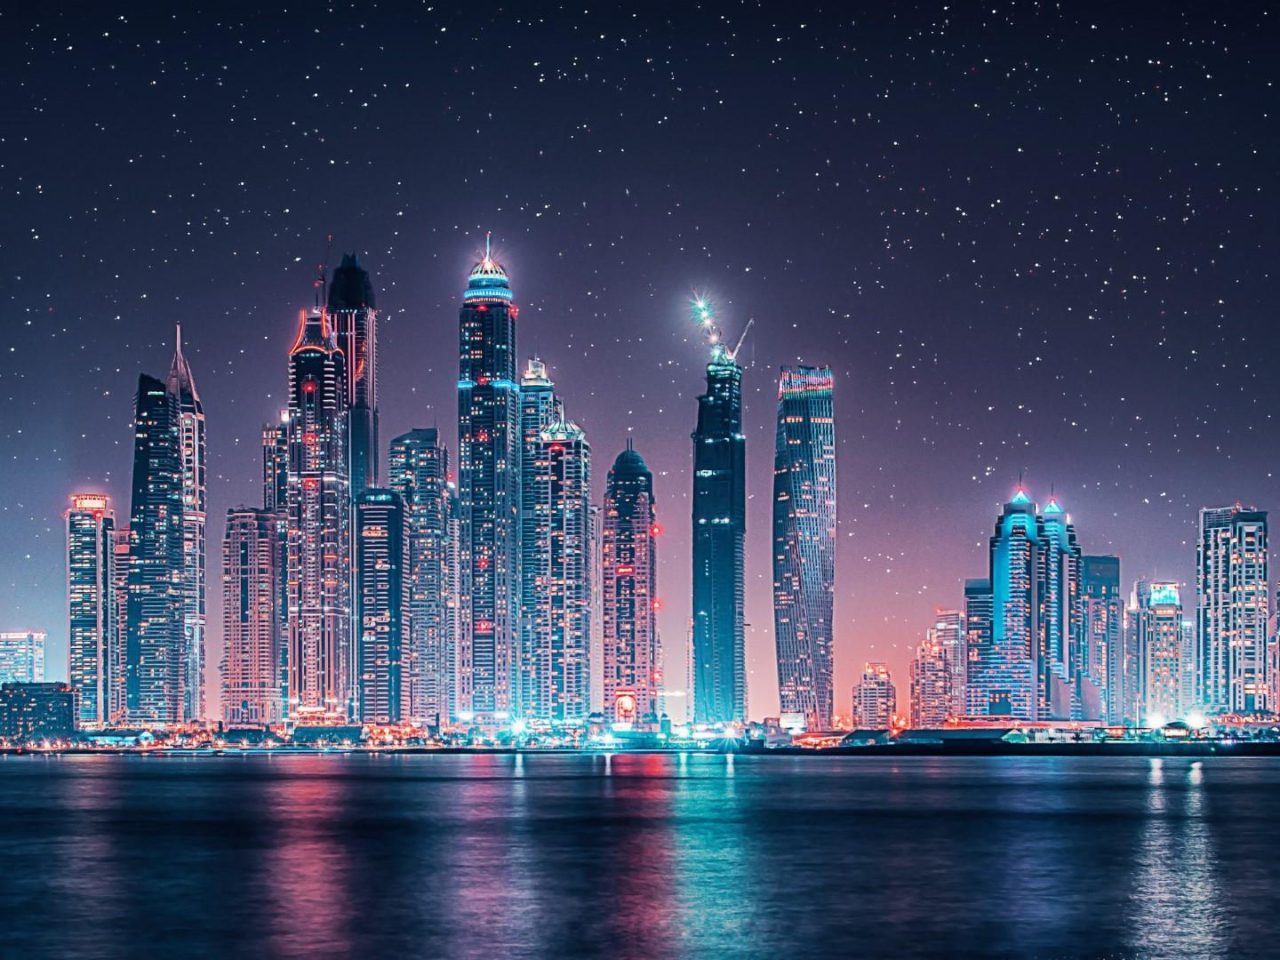 Dubai Skyline Starry Sky At Night Ultra HD Wallpaper For Android Mobile Phones Tablet And Lapx1080, Wallpaper13.com